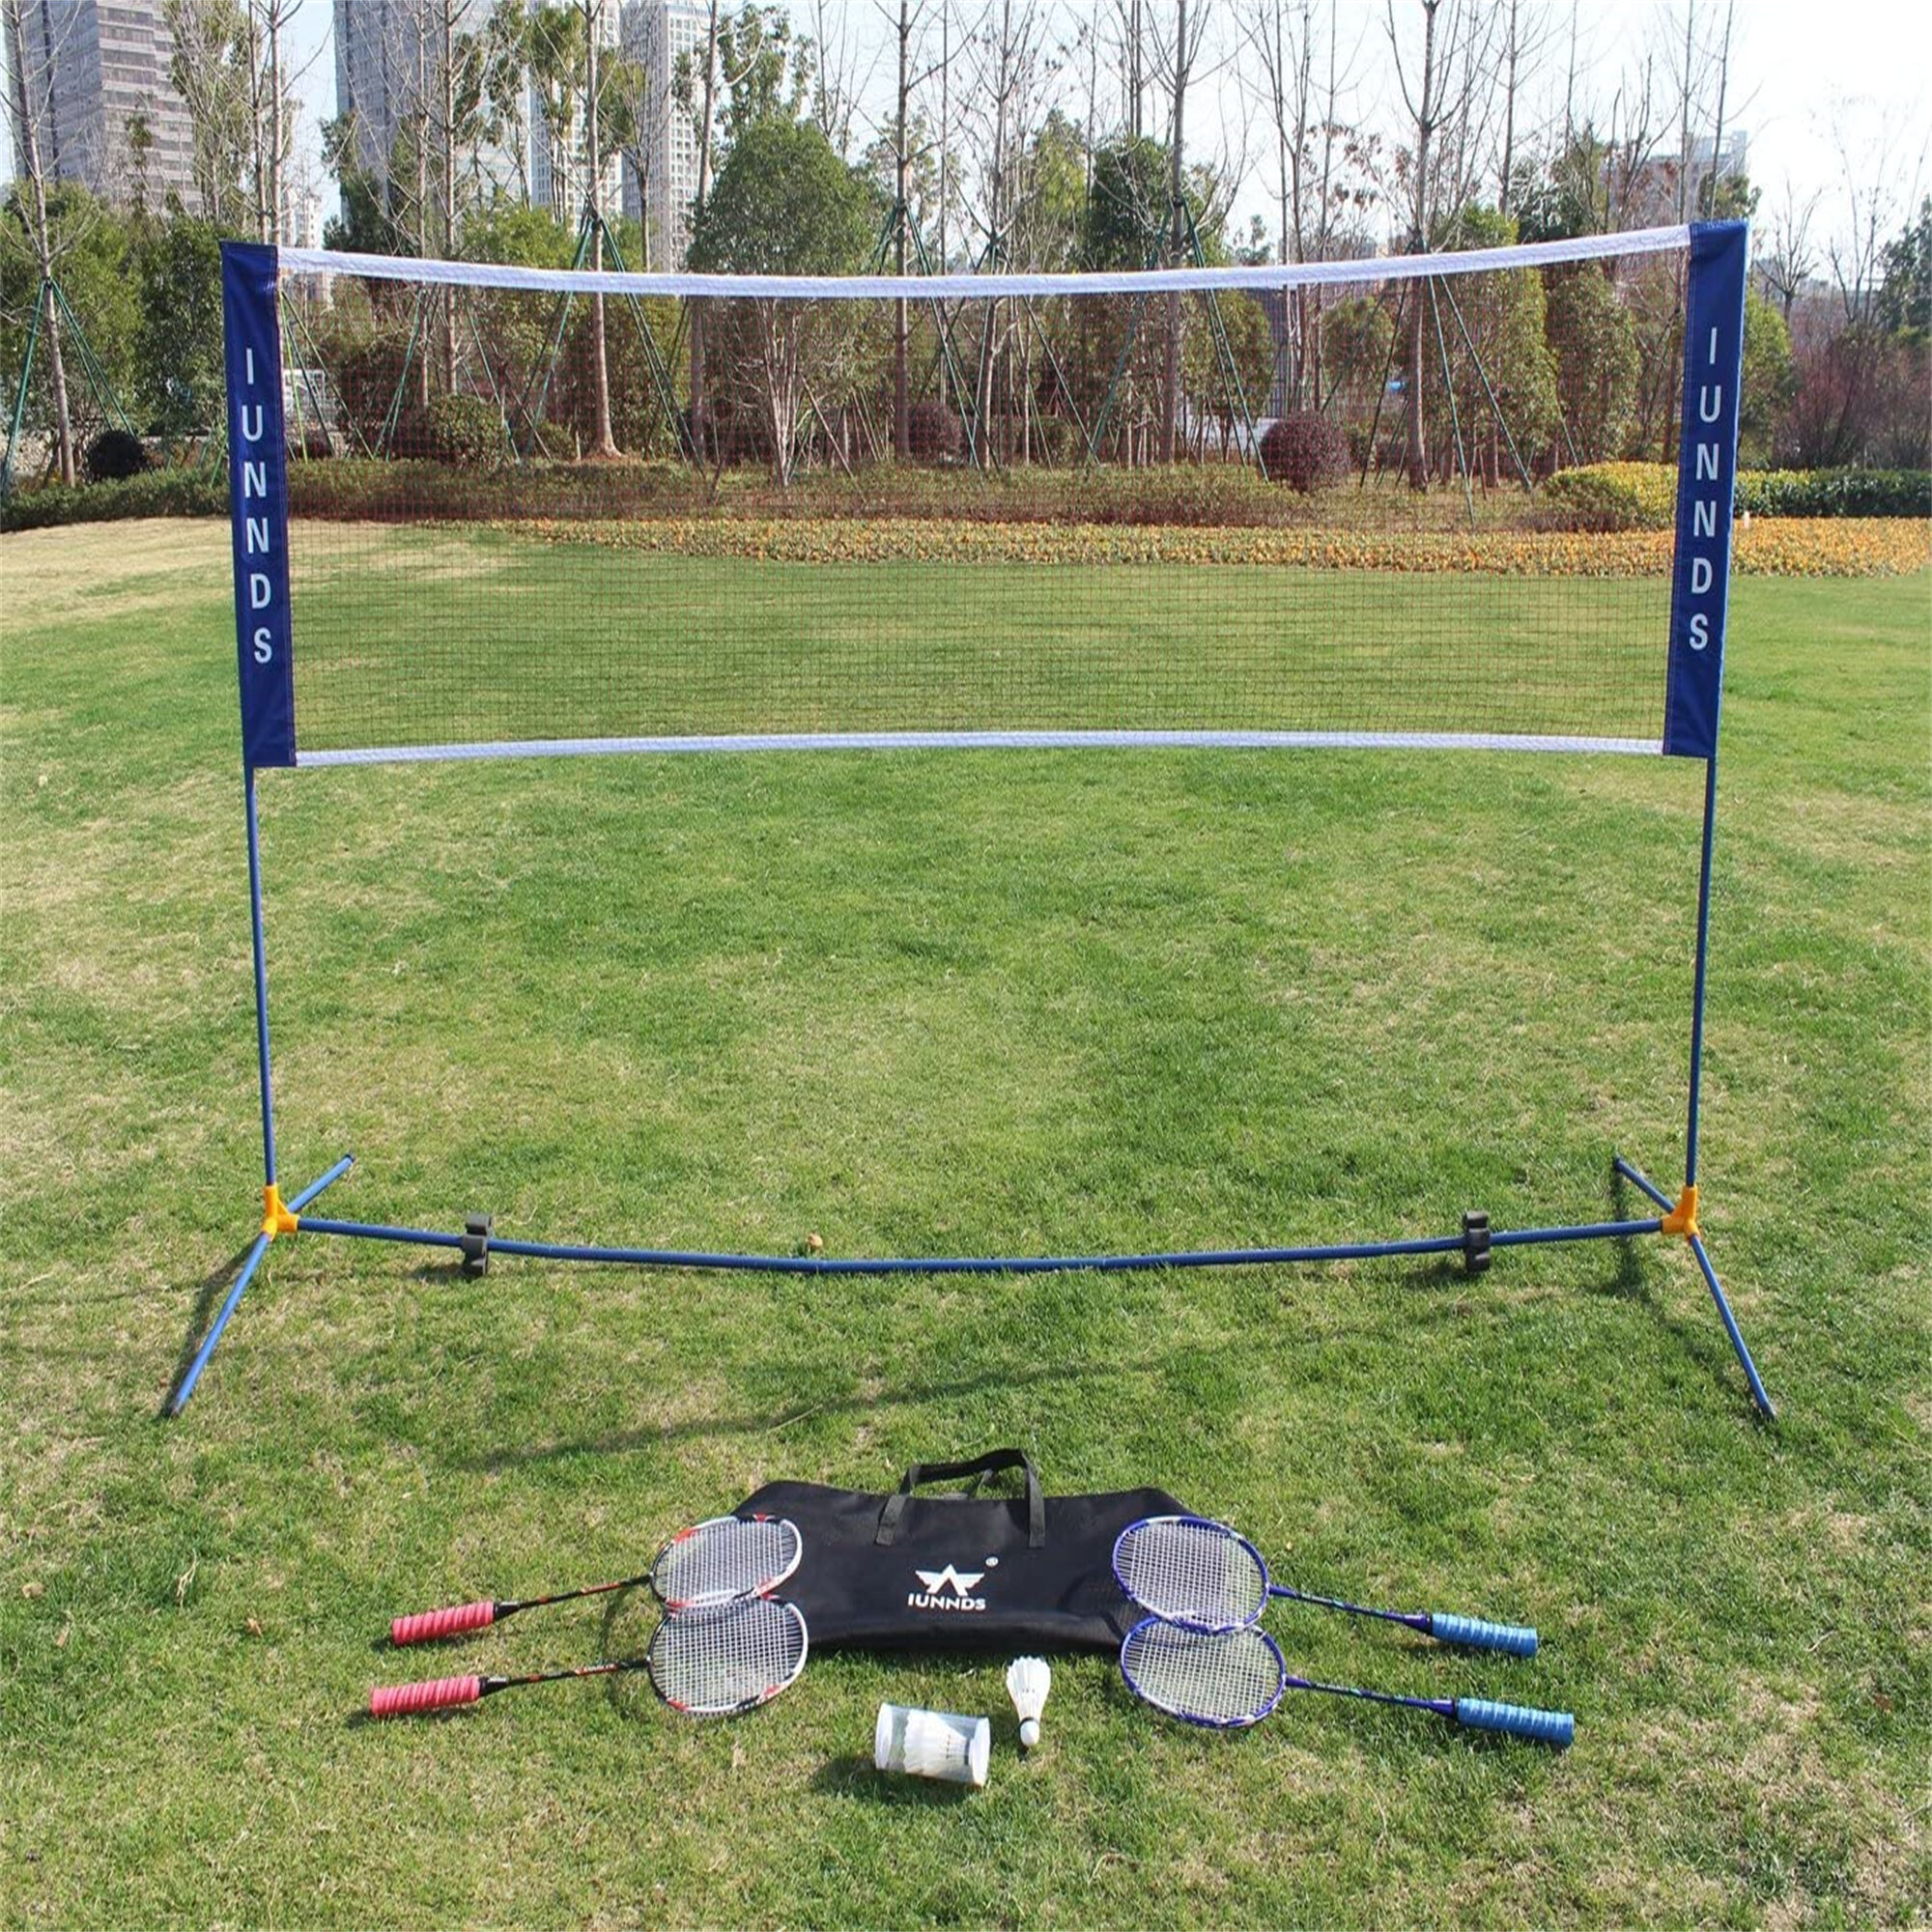 Youyijia 3M Foldable Badminton Net Tennis Net Set Volleyball Net Adjustable for Tennis Kids Volleyball Nylon Sports Net with Poles